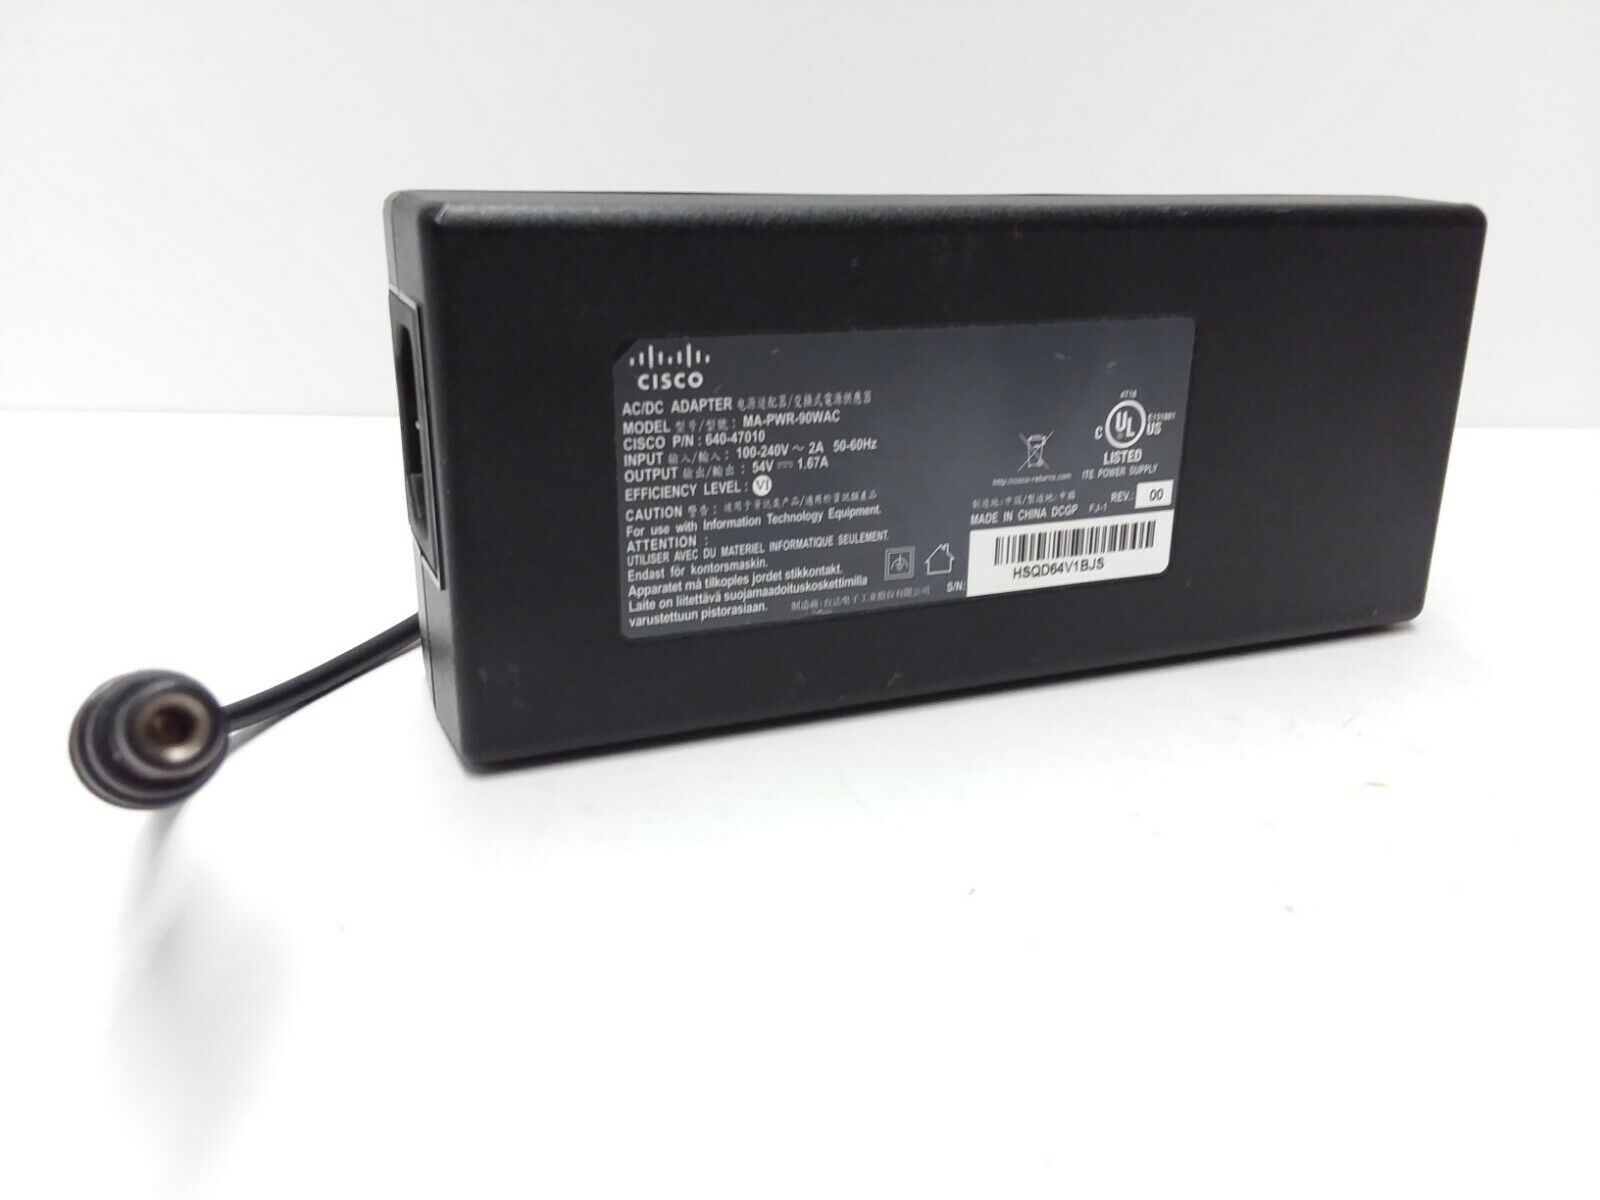 NEW Cisco MA-PWR-90WAC 640-47010 54V 1.67A 90W DC Power Supply for MX65 MX68 MS120-8LP - Click Image to Close